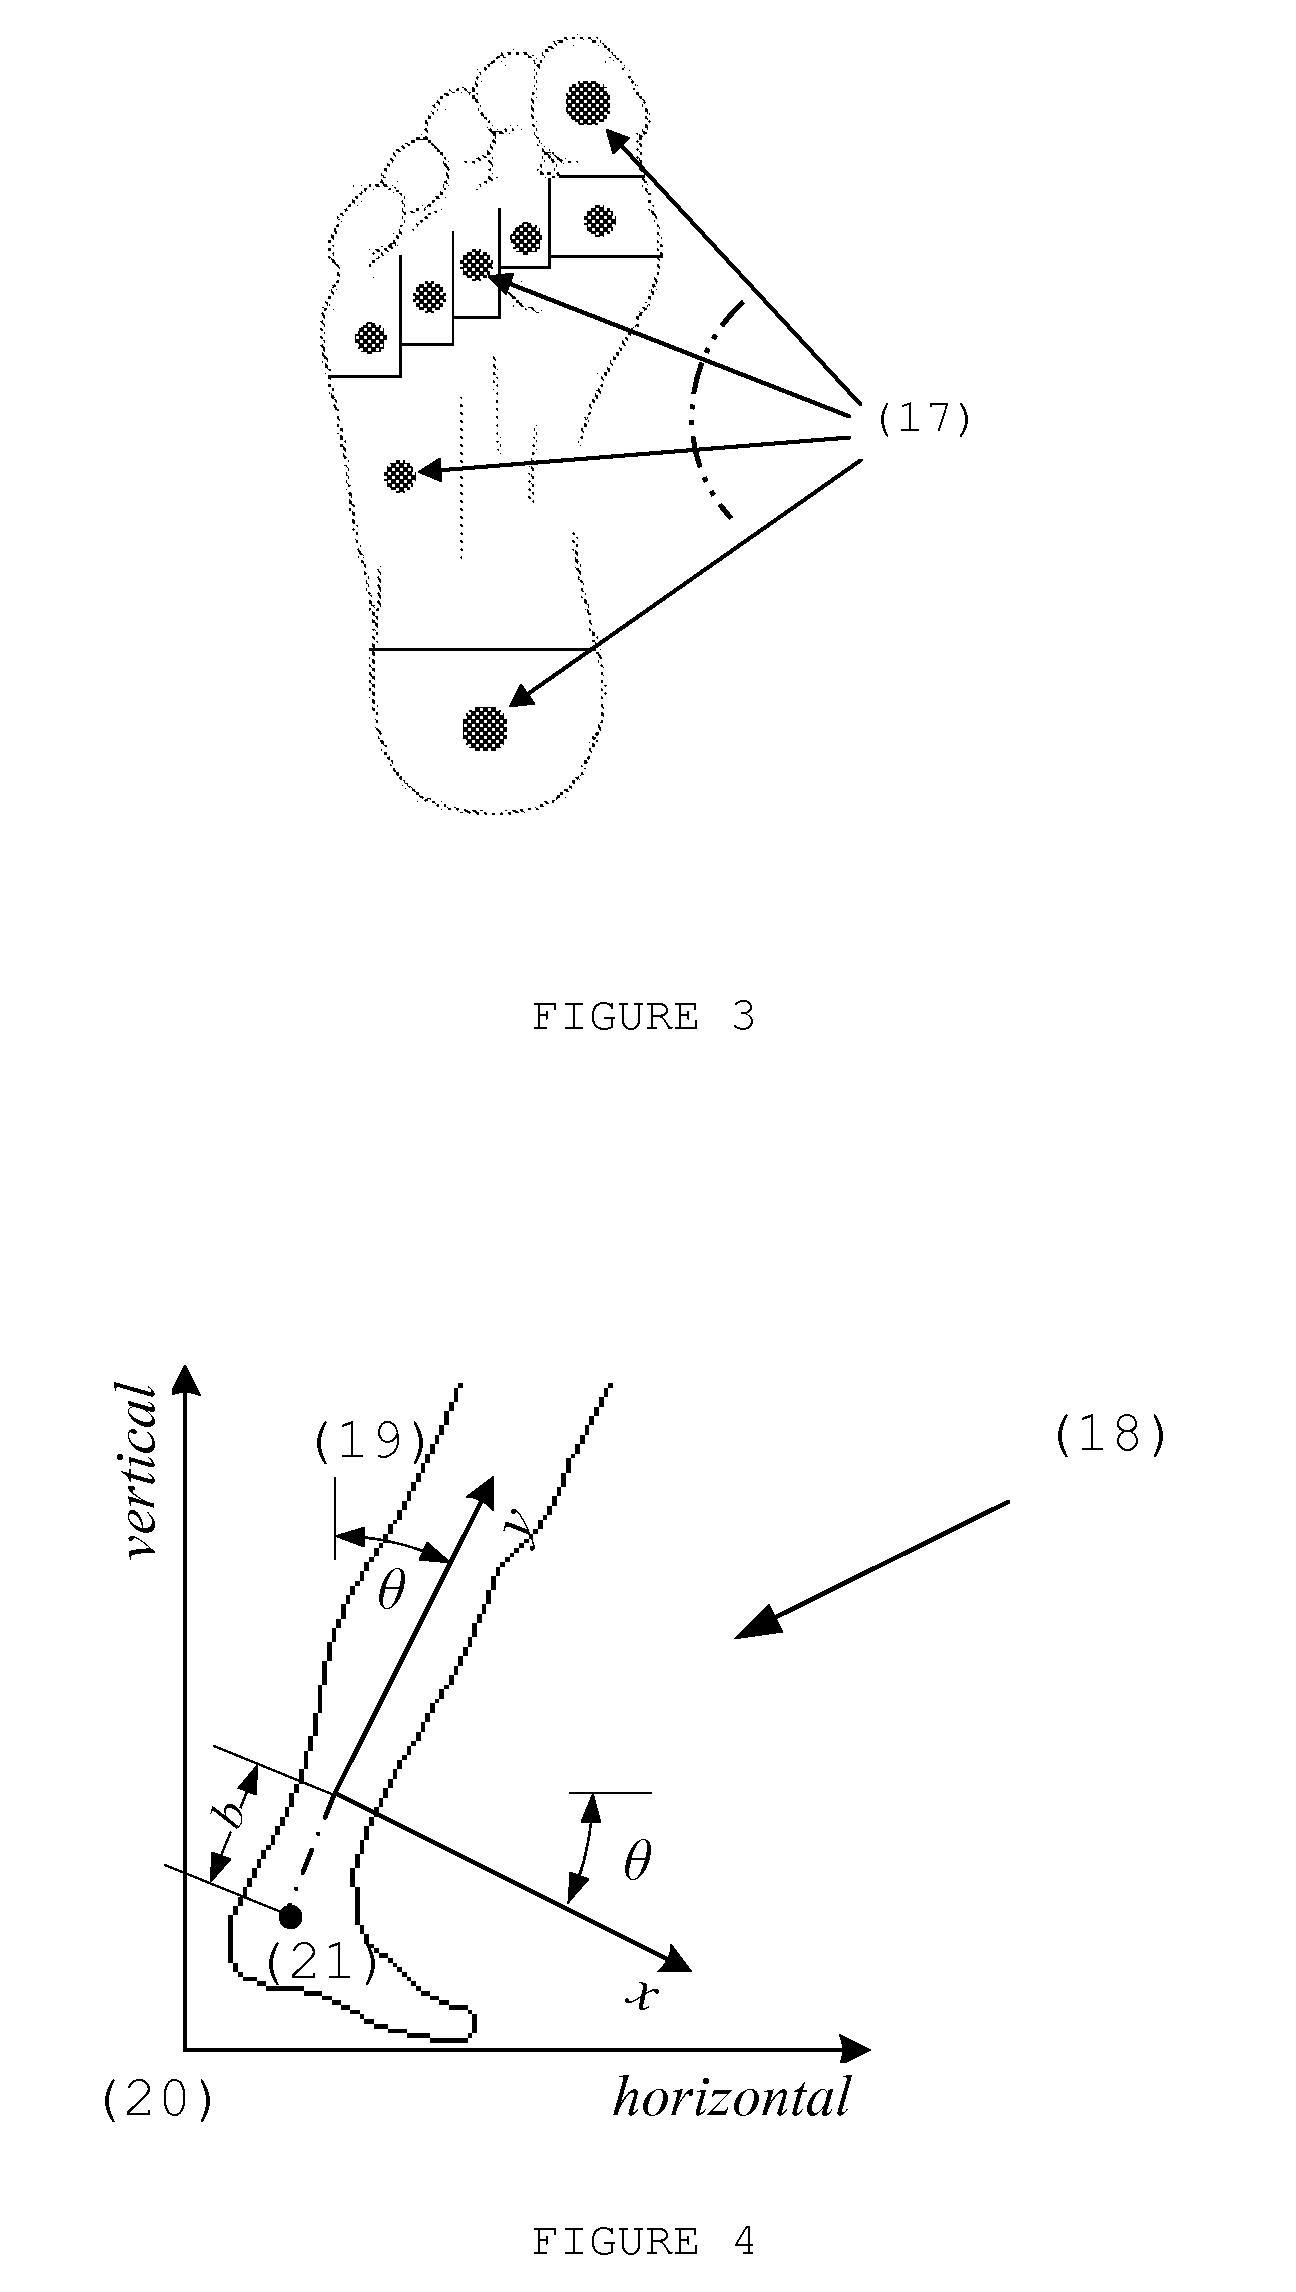 Portable device and method for measurement and calculation of dynamic parameters of pedestrian locomotion